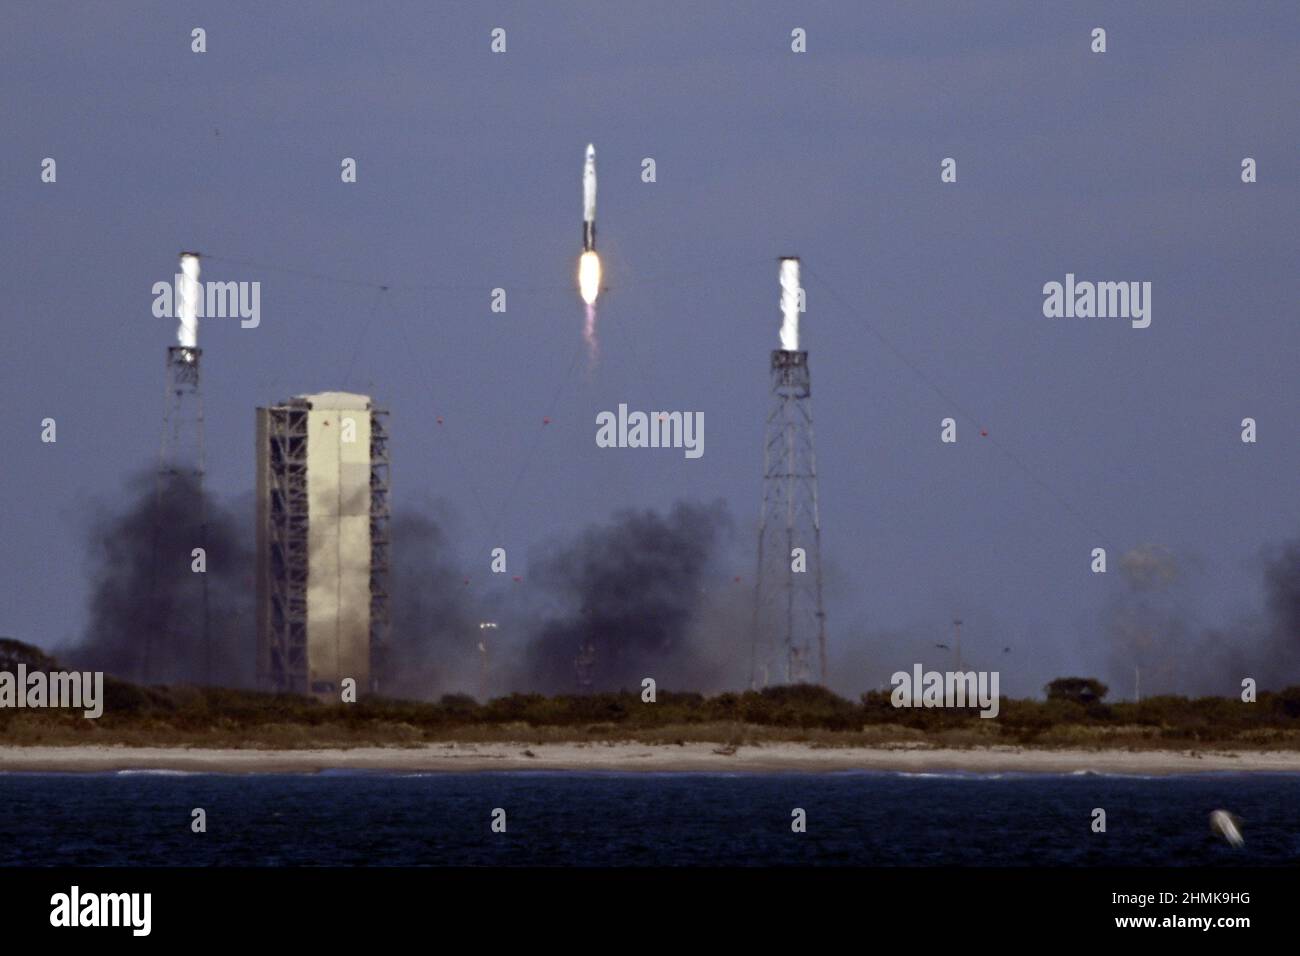 An Astra rocket launches on its first flight from Complex 46 at the Cape Canaveral Space Force Station, Florida on Thursday, February 10, 2022. The vehicle is designed to carry smaller payloads for the Space Industry and Universities sponsored by NASA's Venture Class Launch Services Program. The mission failed when the second stage did not separate from the first, causing a total loss of the payload. Photo by Joe Marino/UPI Credit: UPI/Alamy Live News Stock Photo